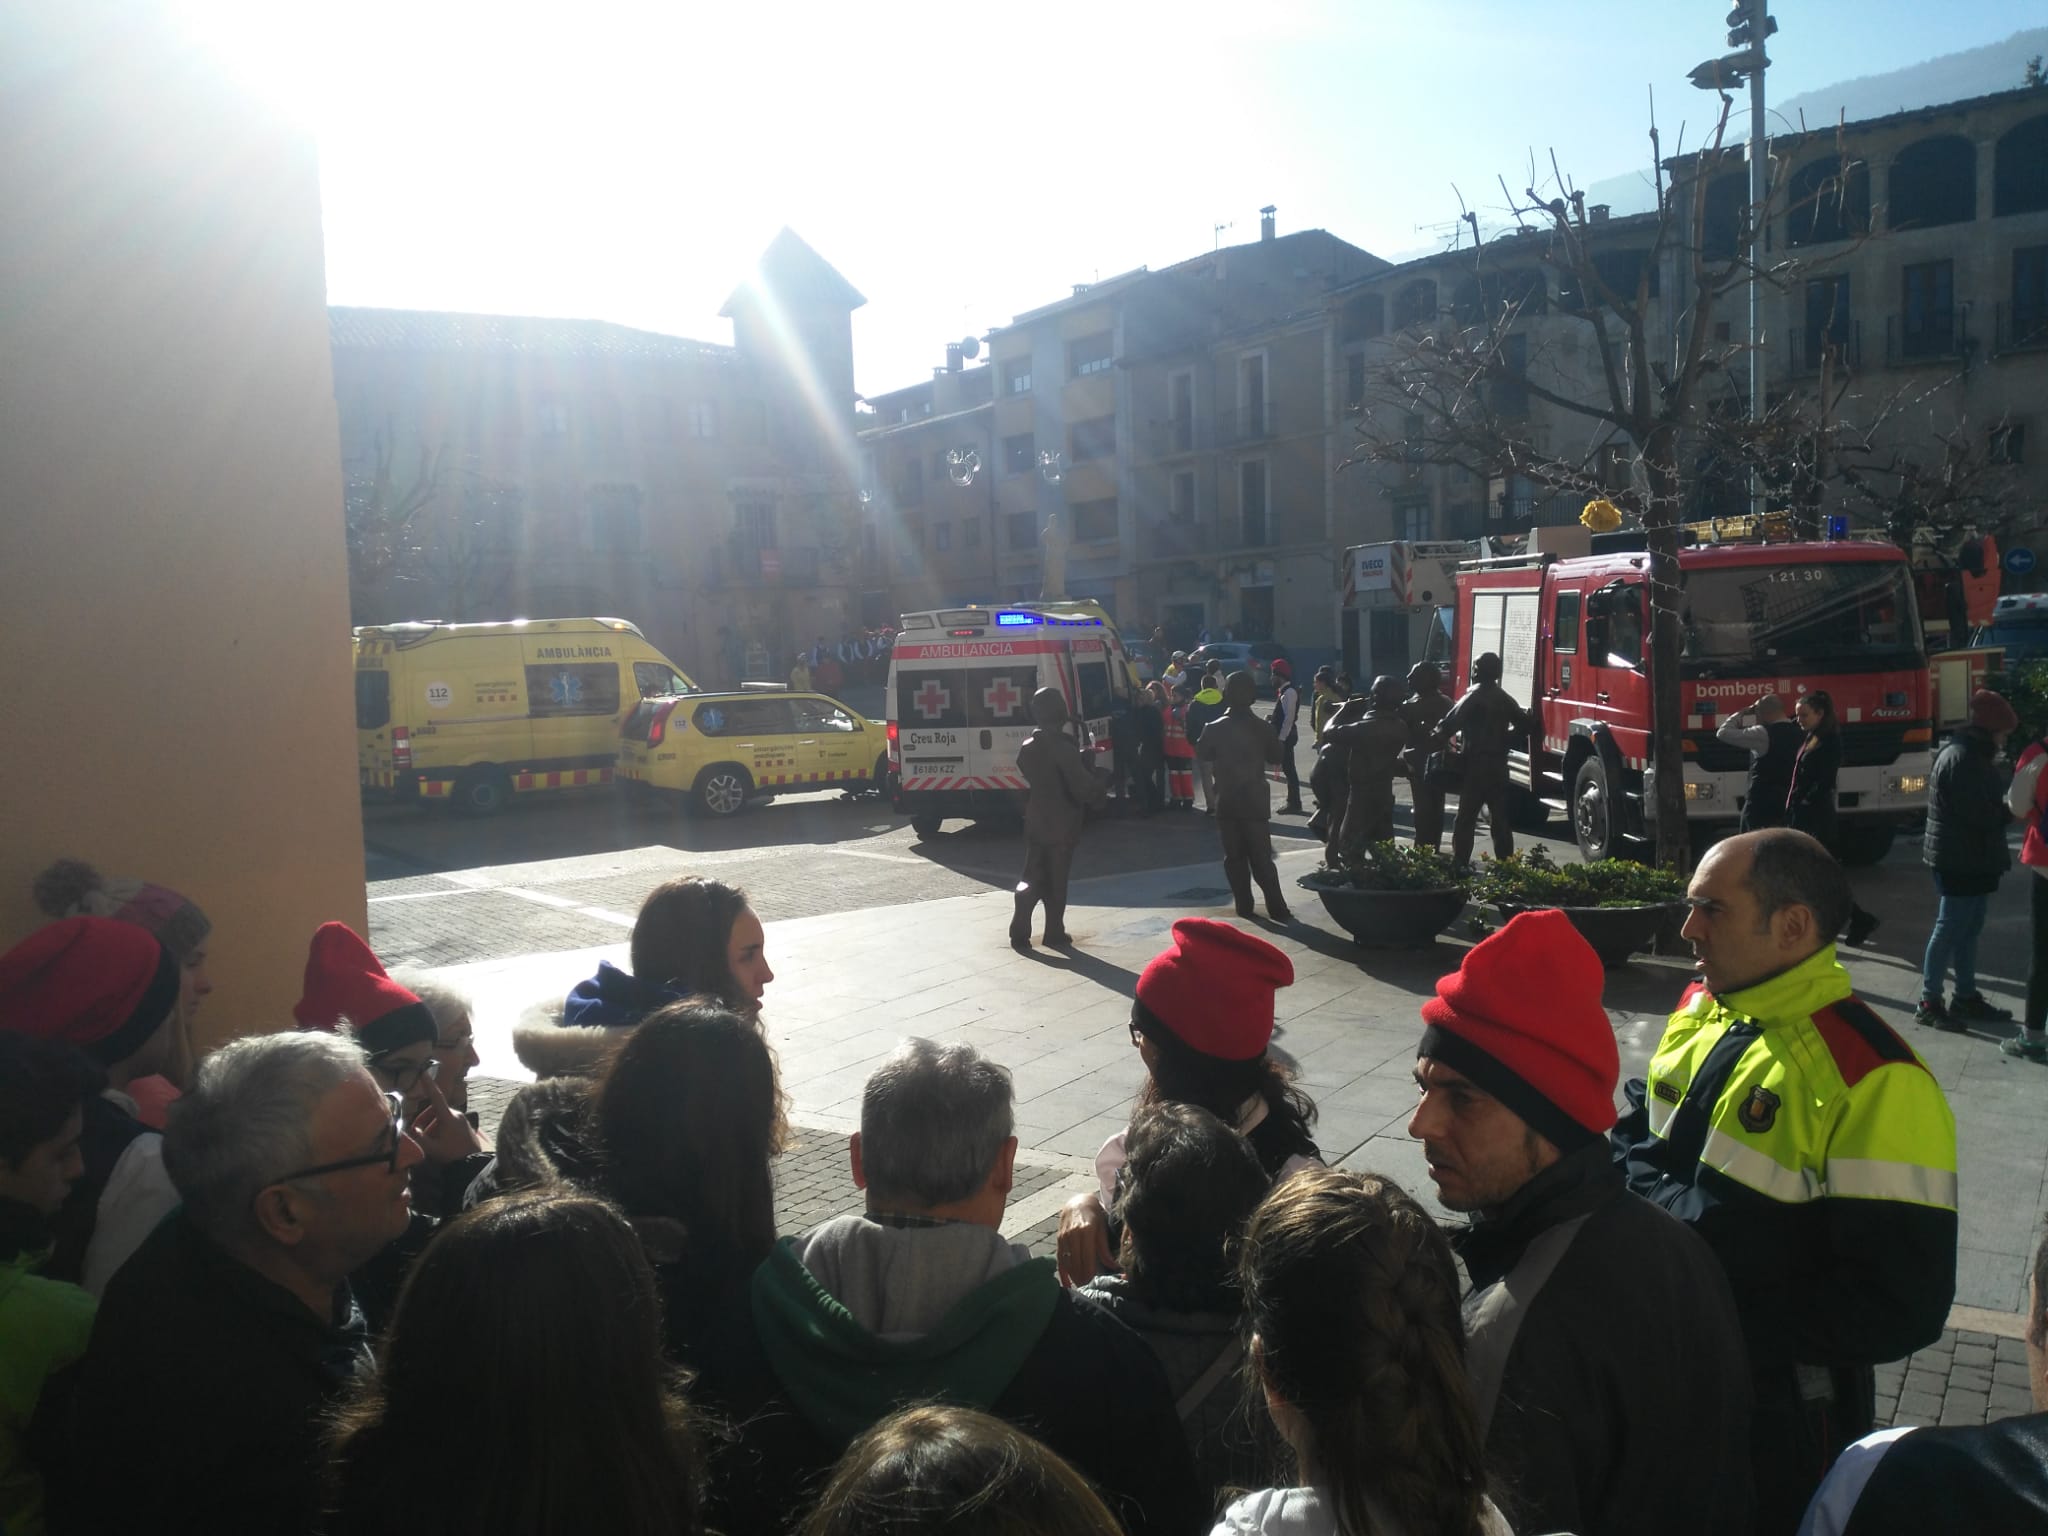 An explosion during the Festa del Pi celebration in Centelles left several people injured (by Martí Clapers)